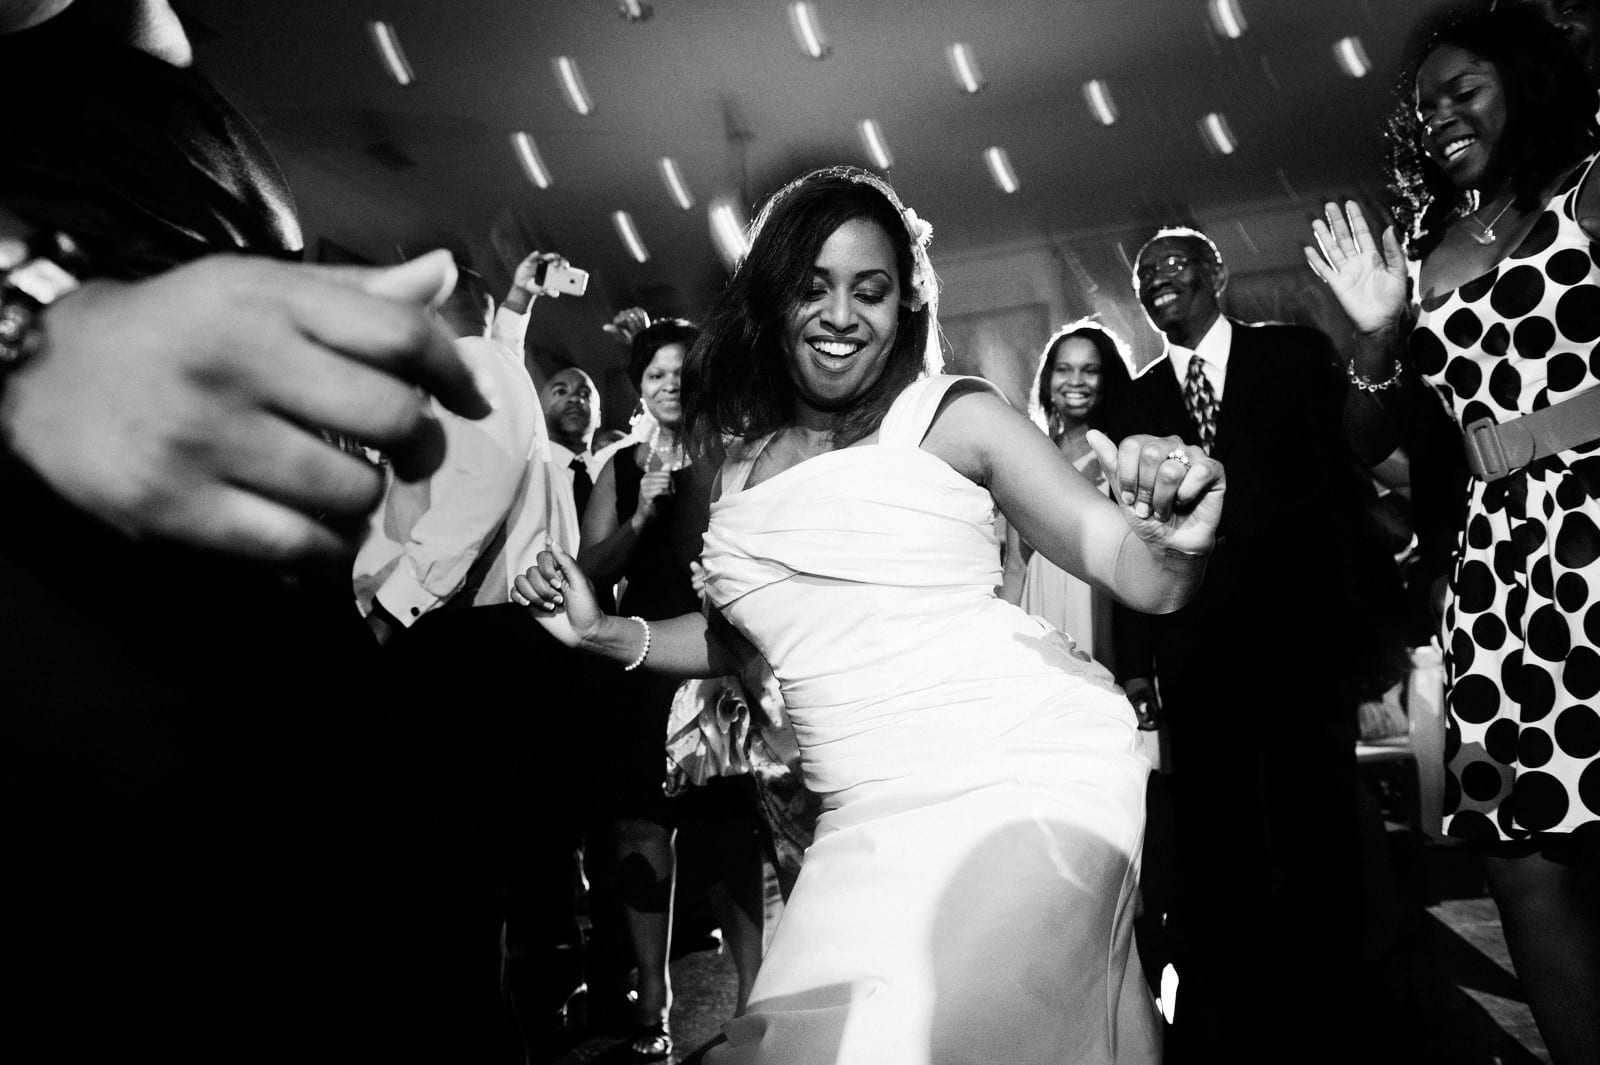 A bride in a white dress dances amongst a crowd of her guests. The small lights on the ceiling are streaks.